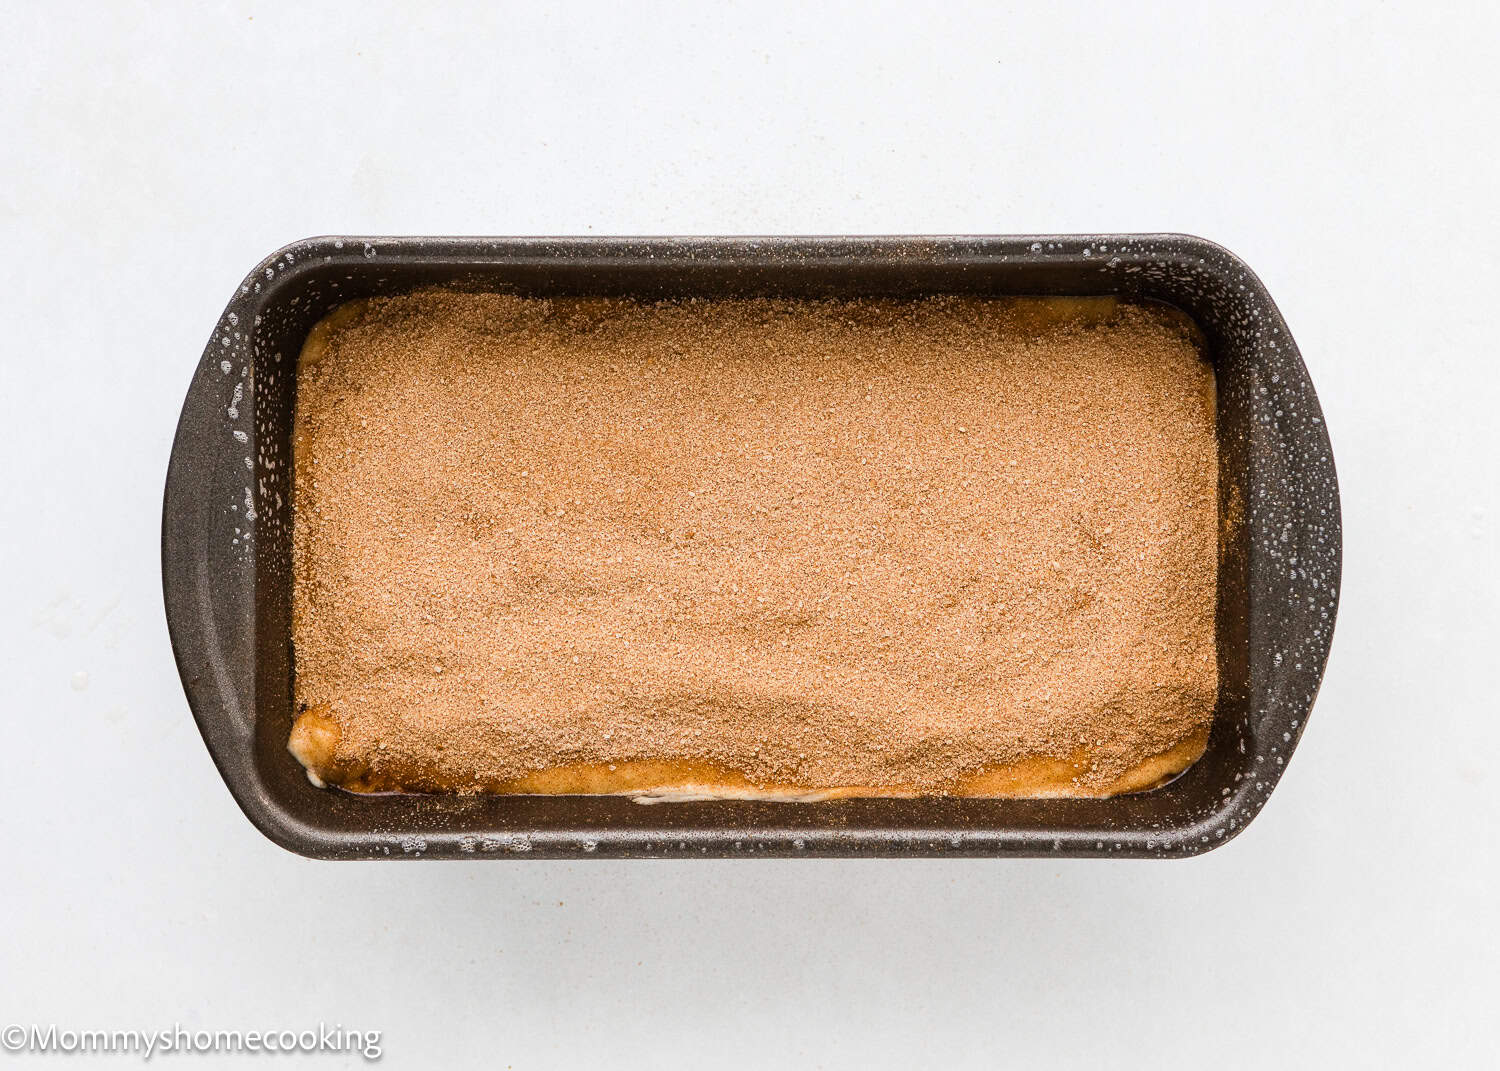 a whole unbaked Vegan Cinnamon Swirl Quick Bread with cinnamon-sugar on top in a loaf pan.